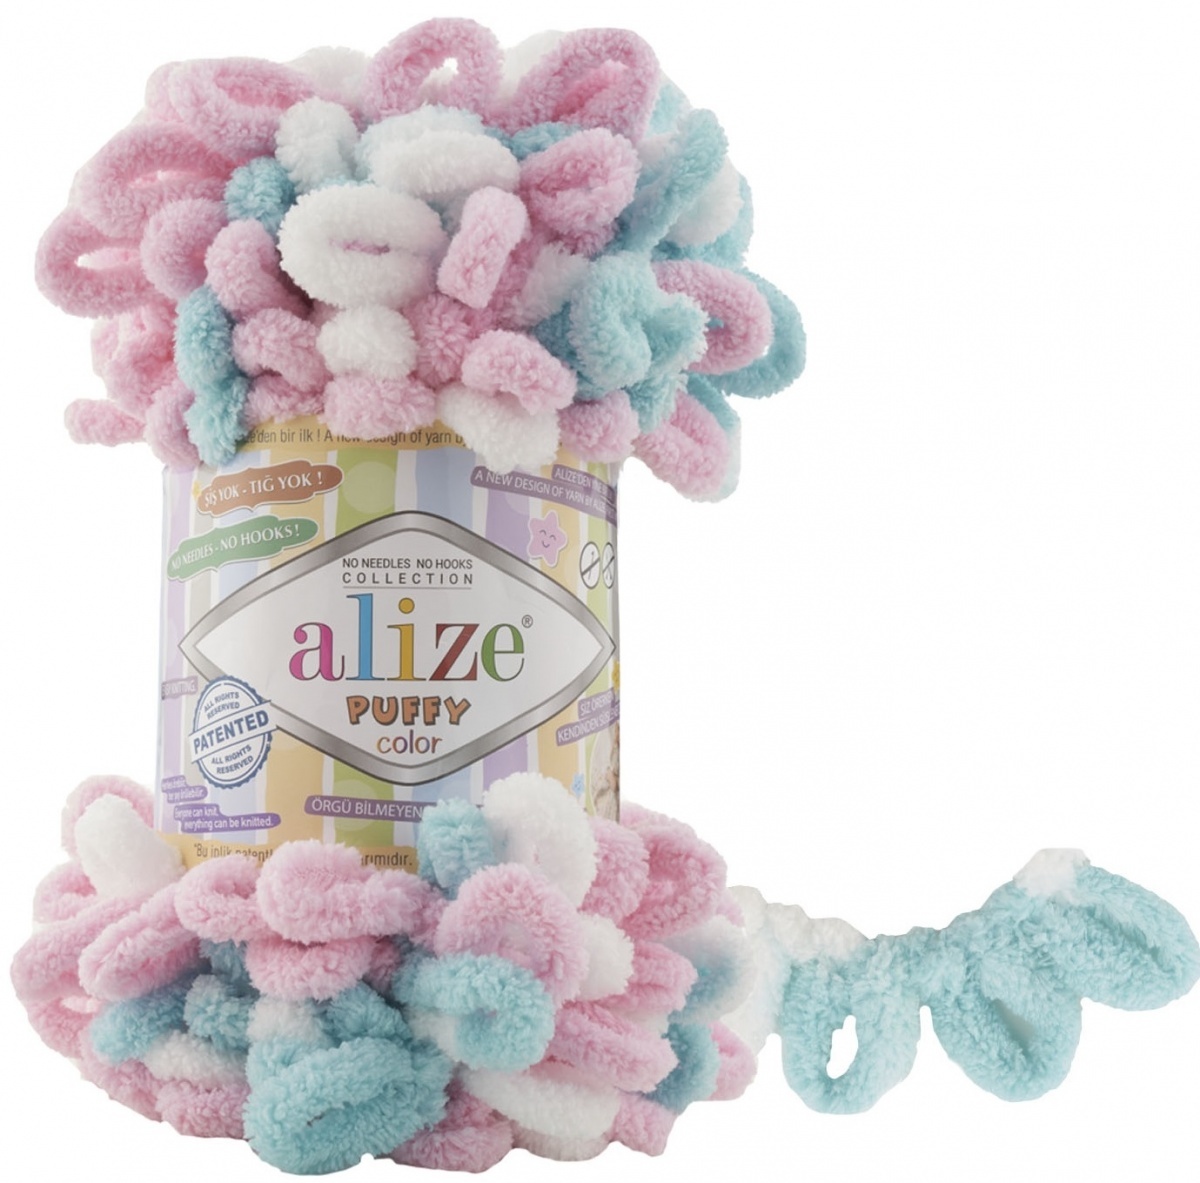 Alize Puffy Color, 100% Micropolyester 5 Skein Value Pack, 500g фото 62